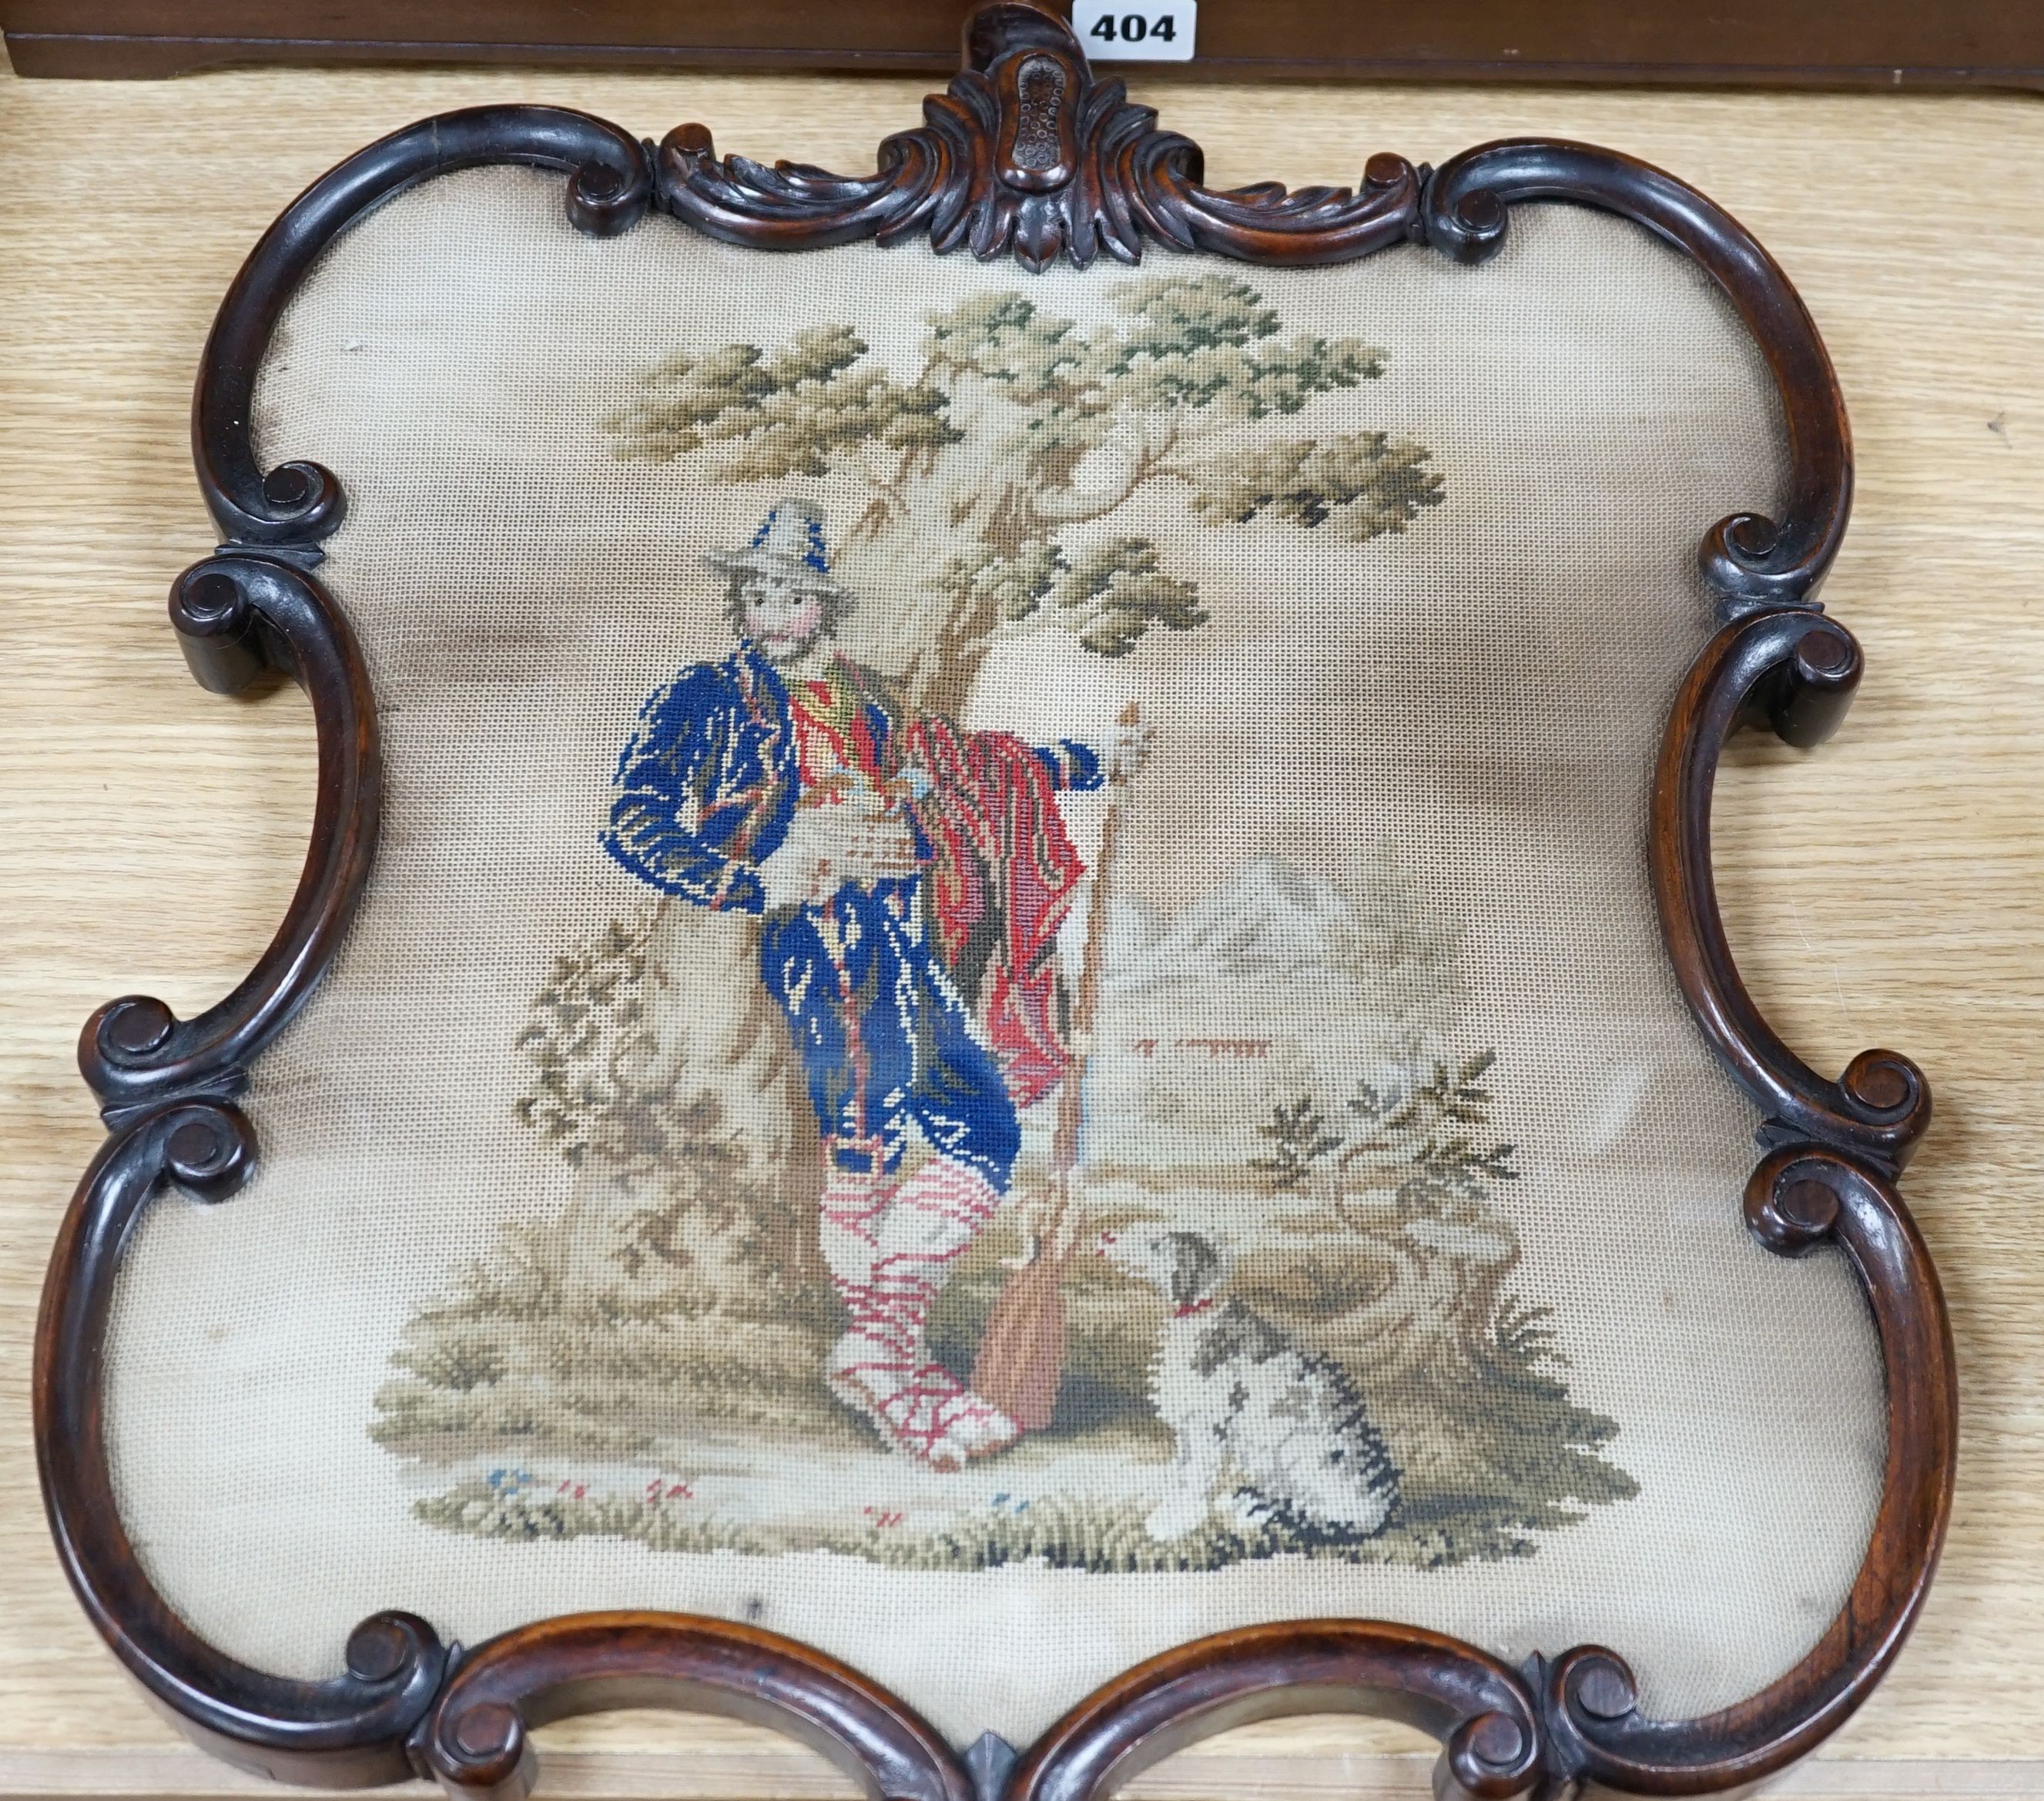 A 19th century petite point framed screen (without pole) of a man and a dog